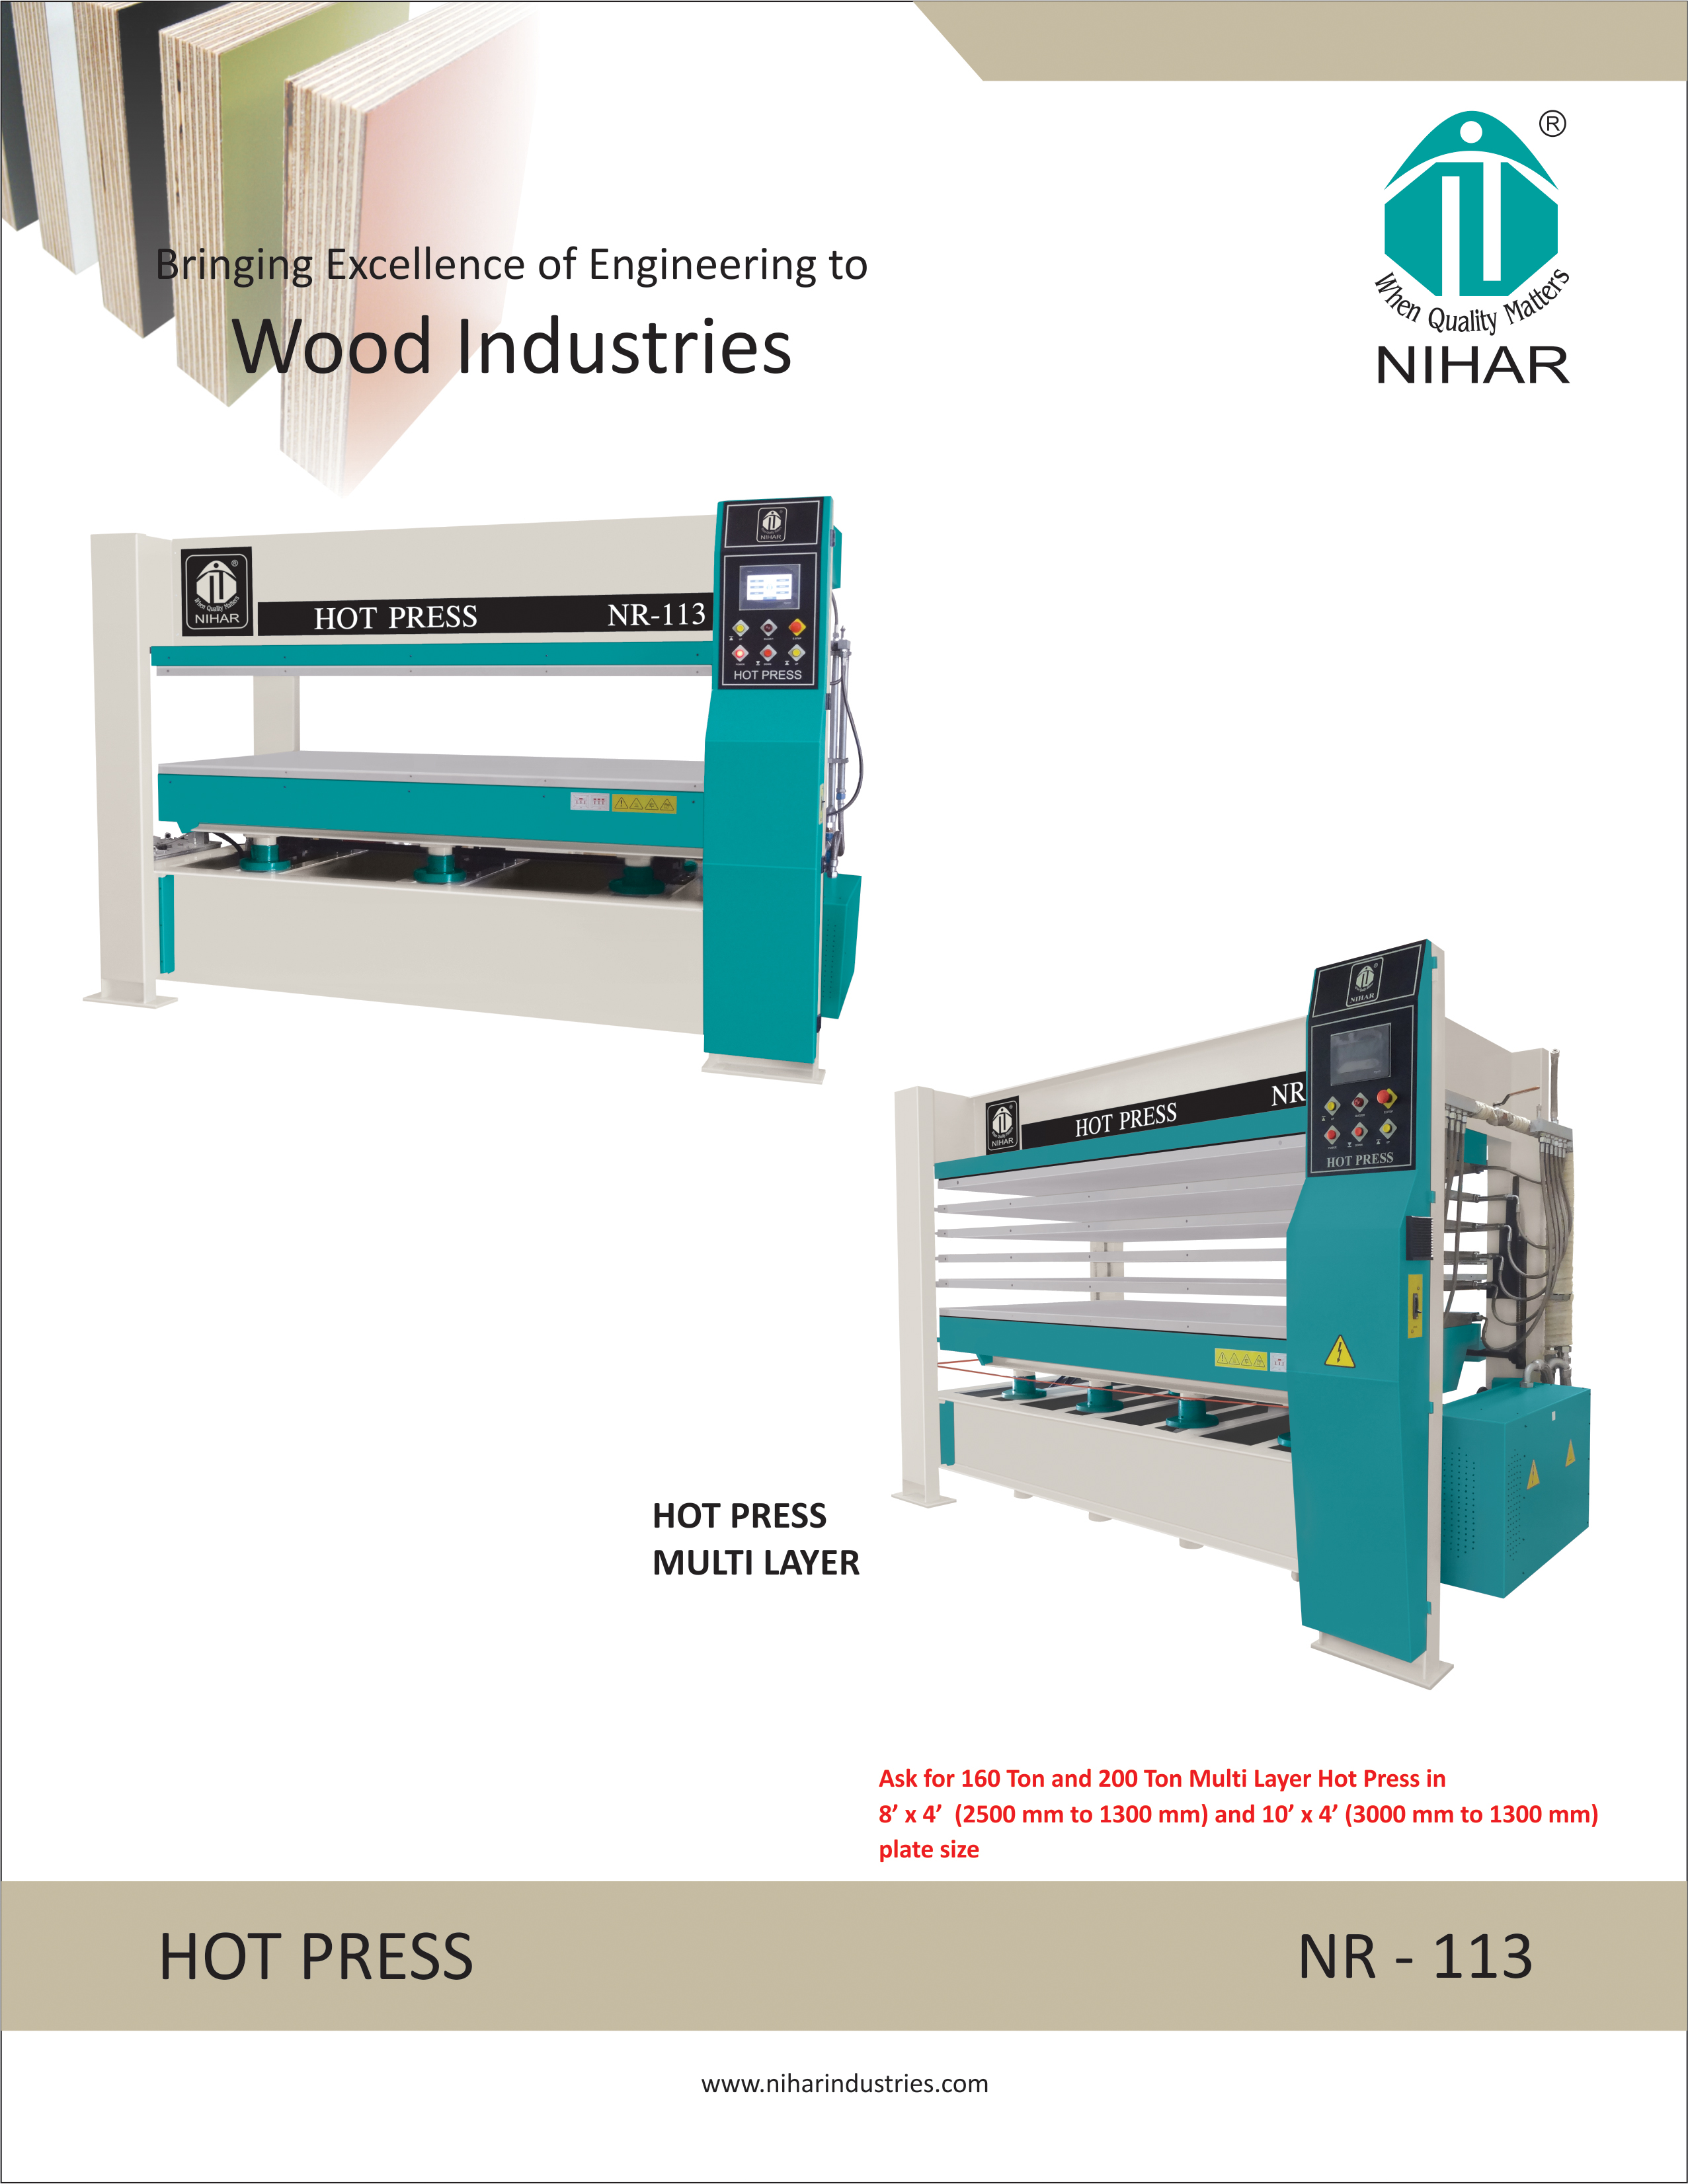 Types of Hot Press Machines for Plywood: Nihar Industries